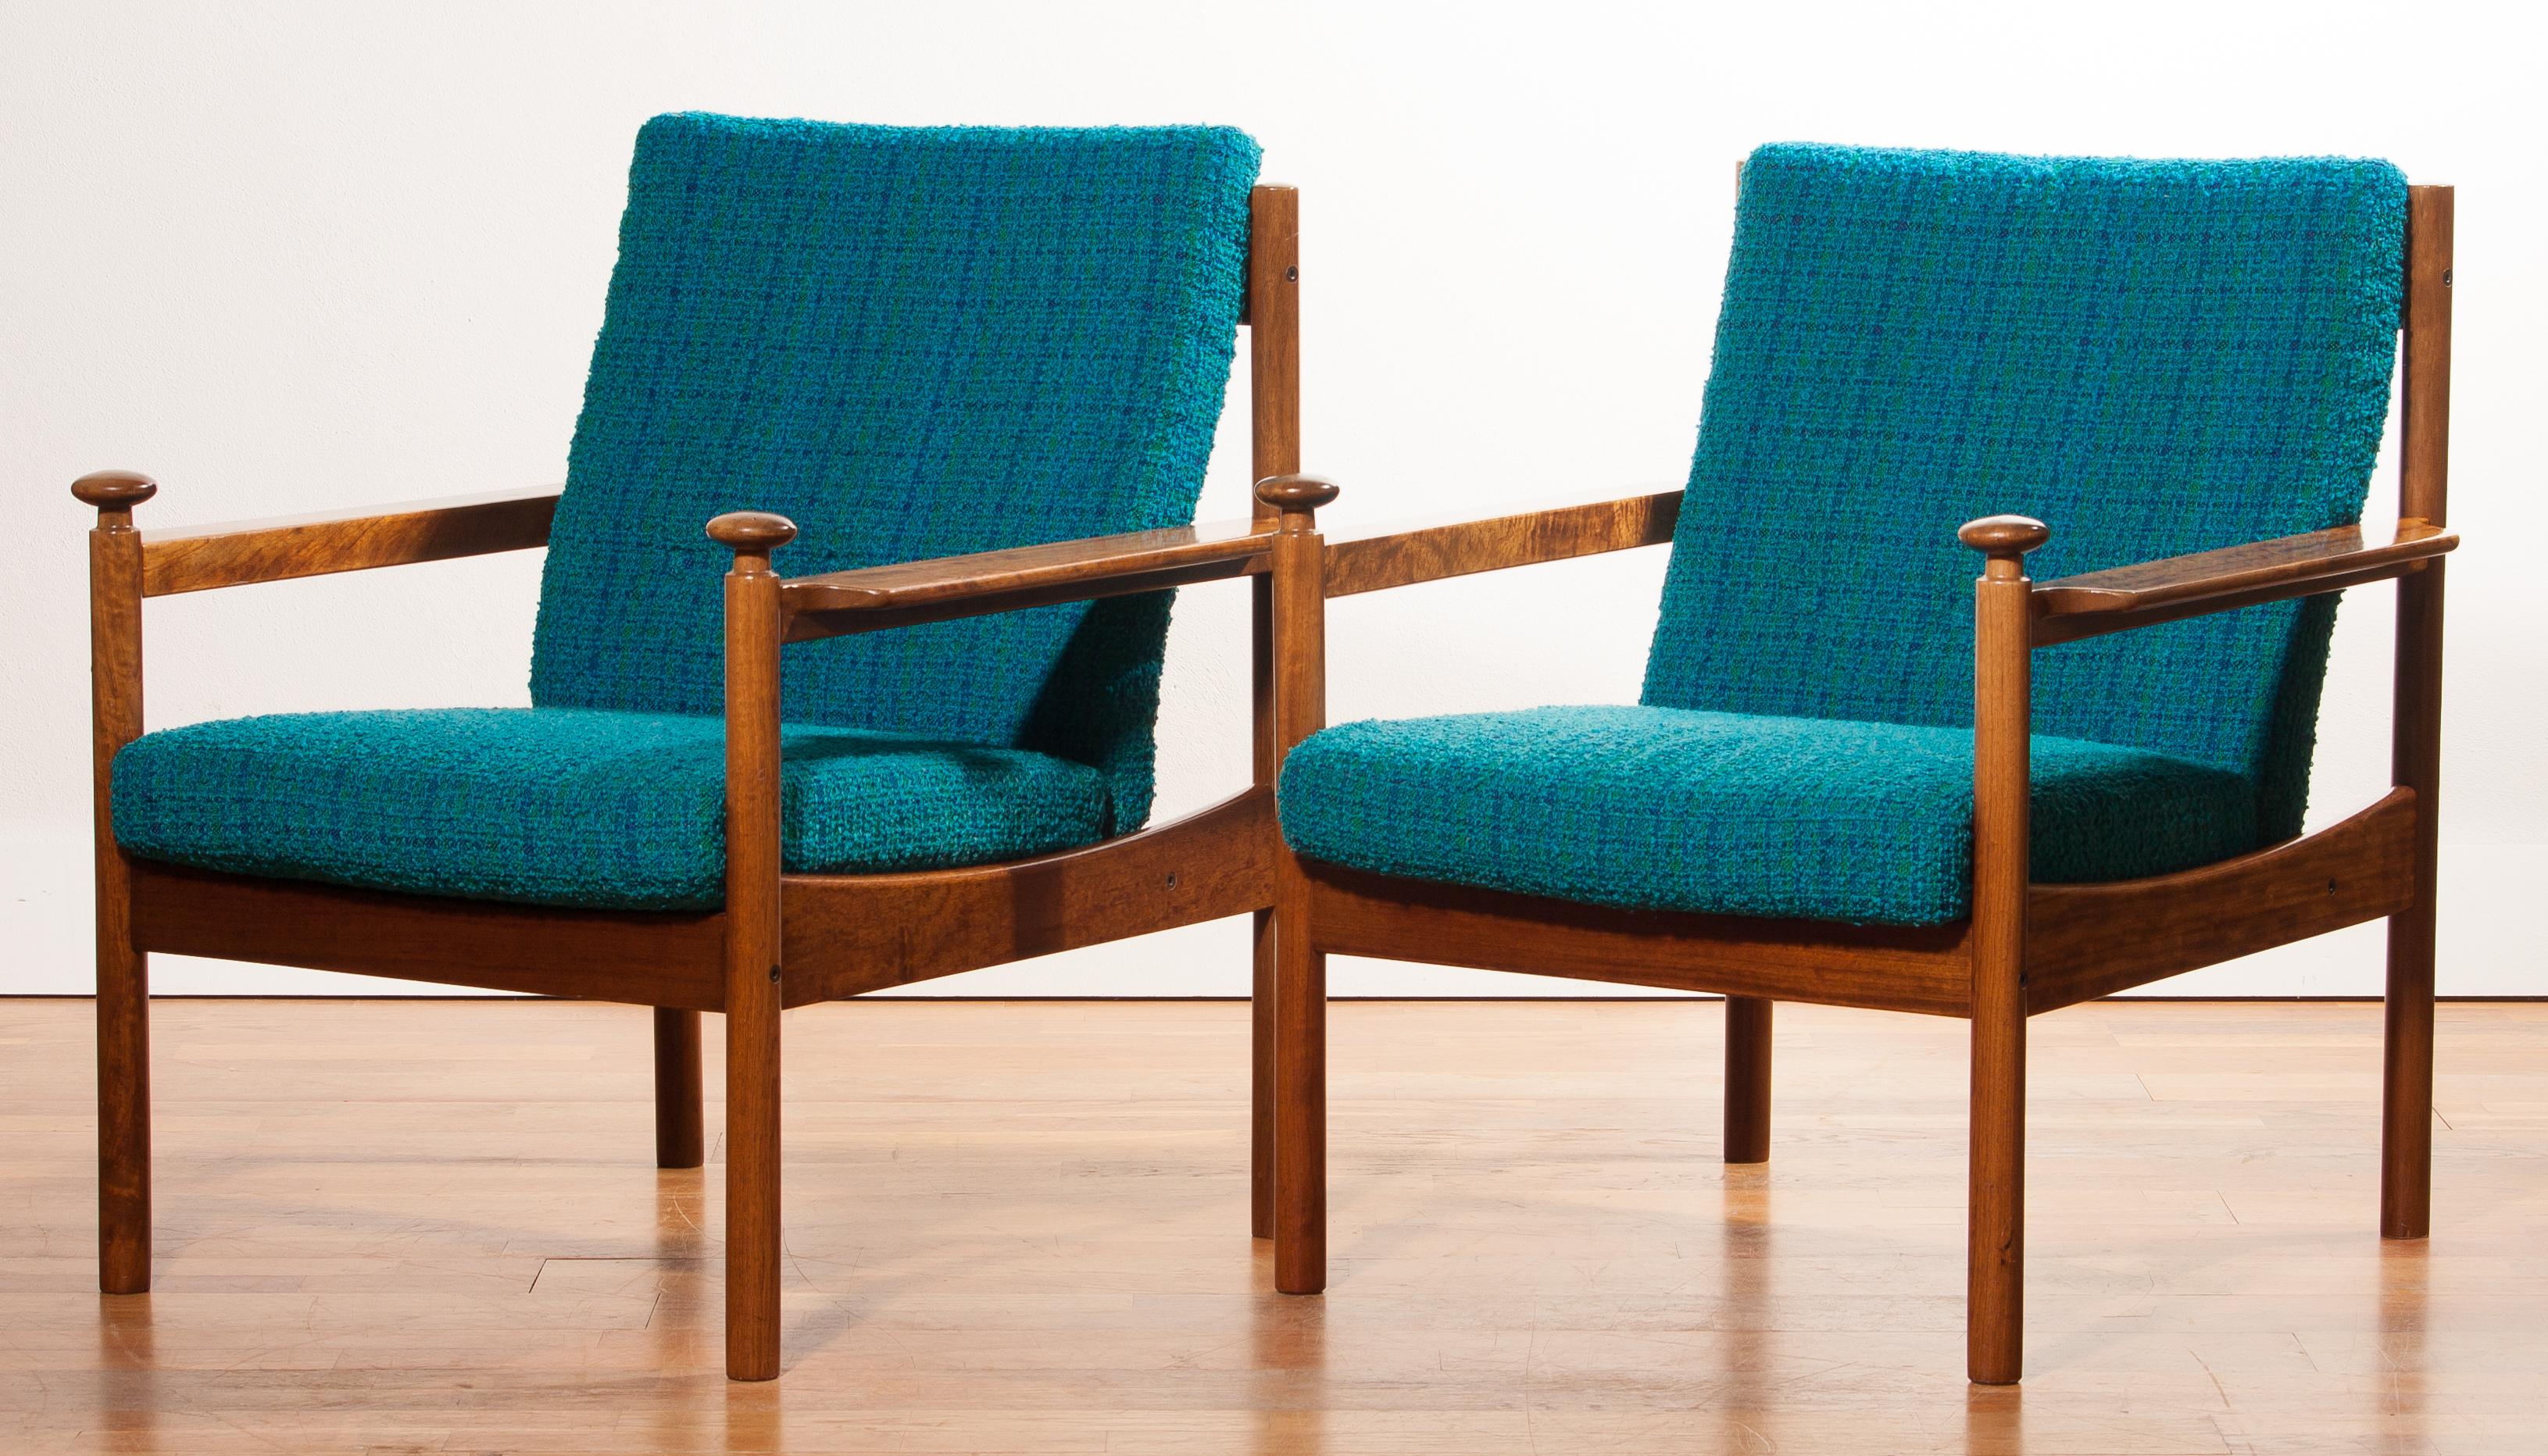 Fabric 1950s, a Pair of Chairs by Torbjørn Afdal for Sandvik & Co. Mobler